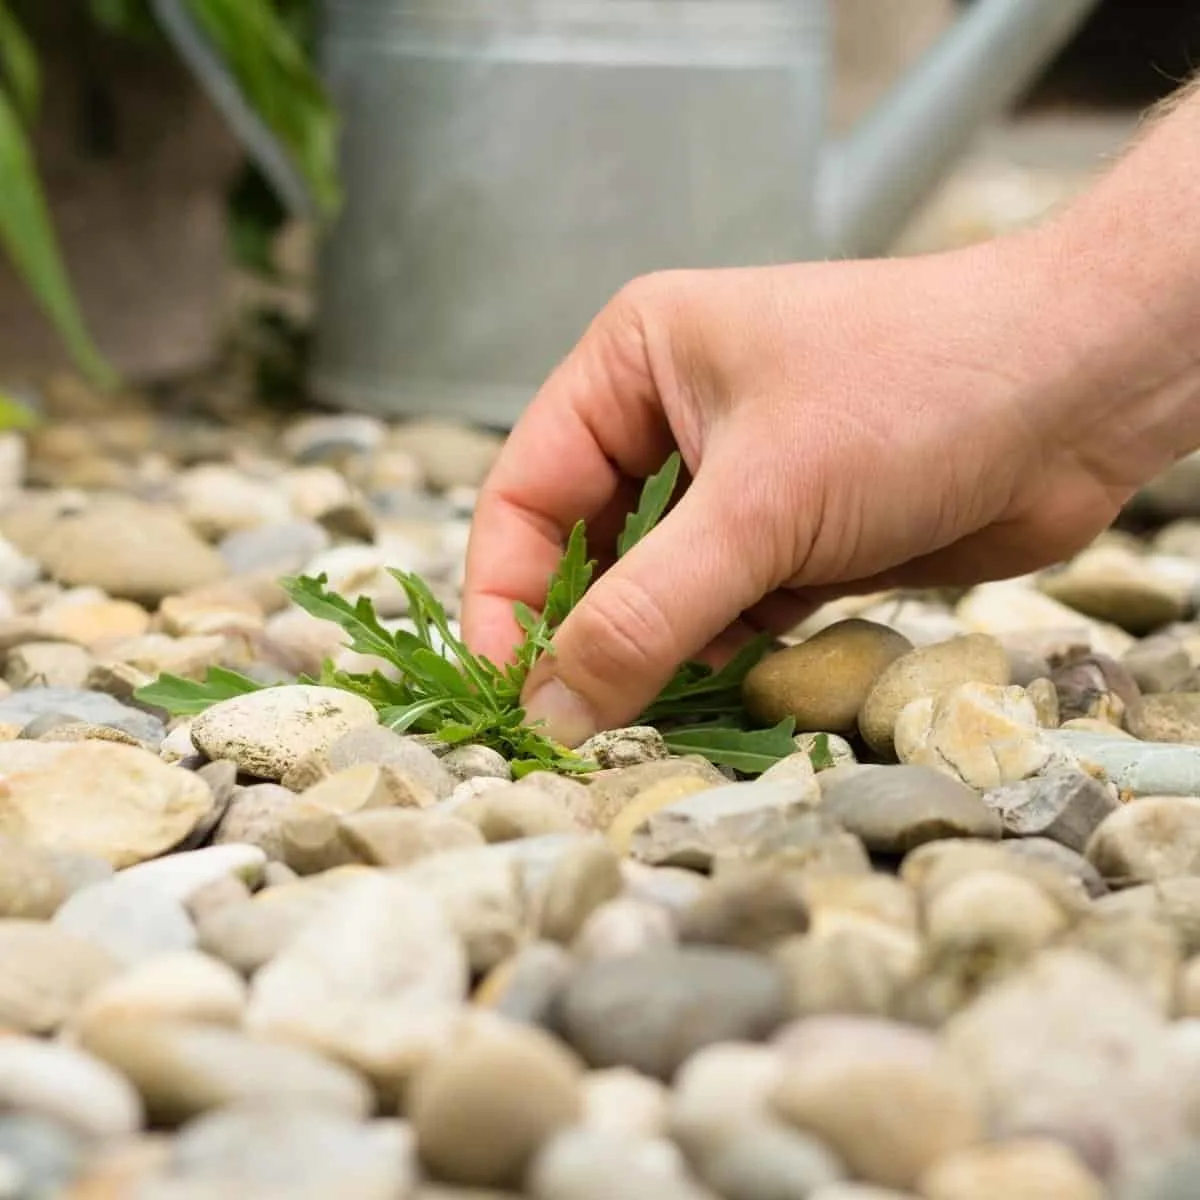 pulling a weed from a pea gravel patio